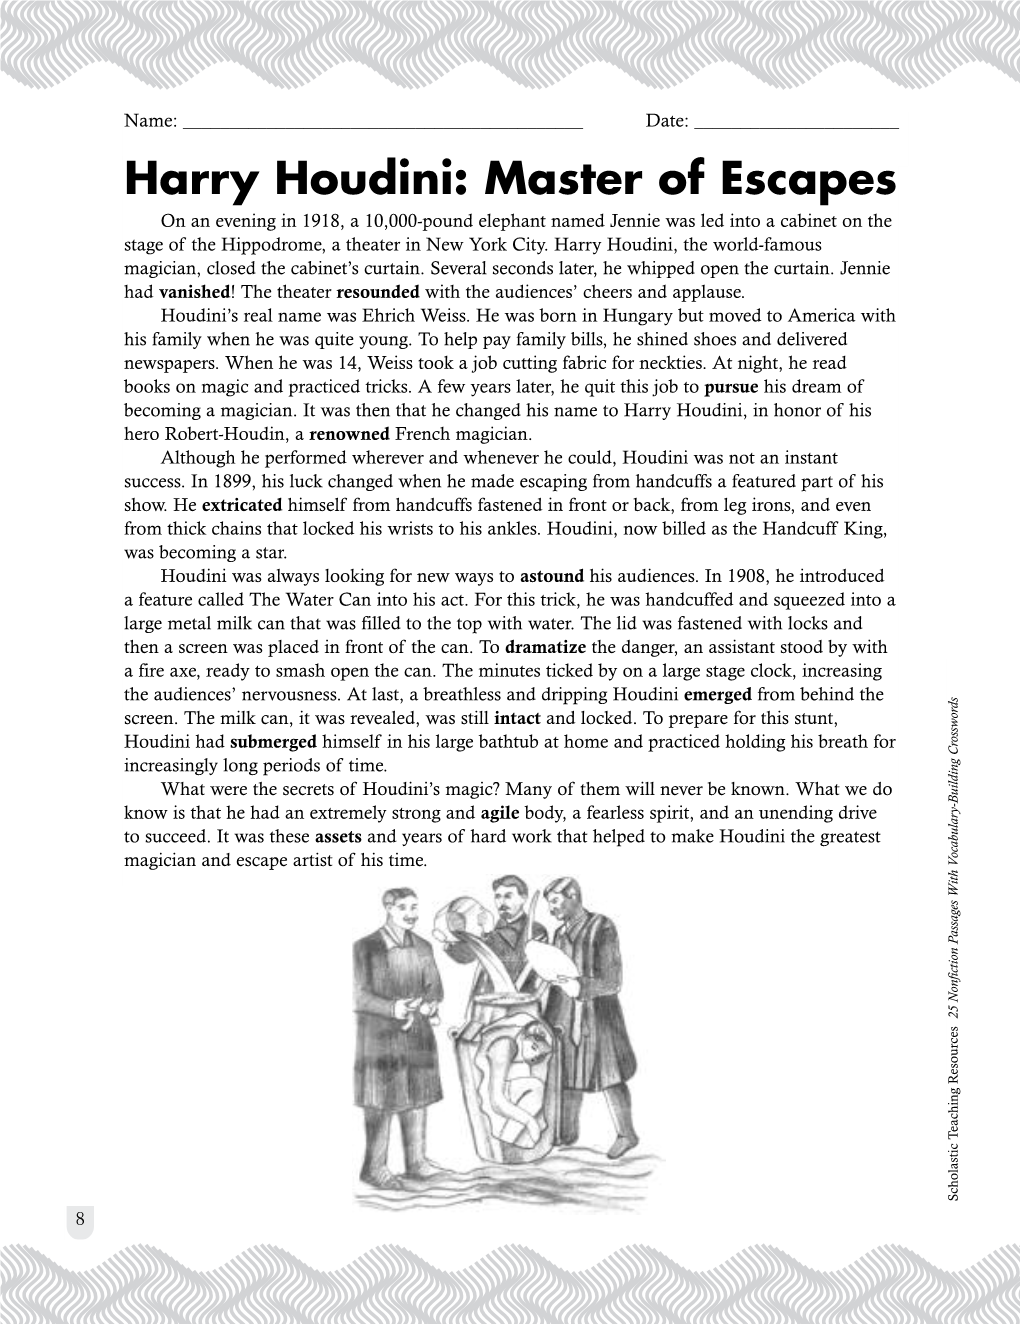 "Harry Houdini: Master of Escapes" Passage and Crossword